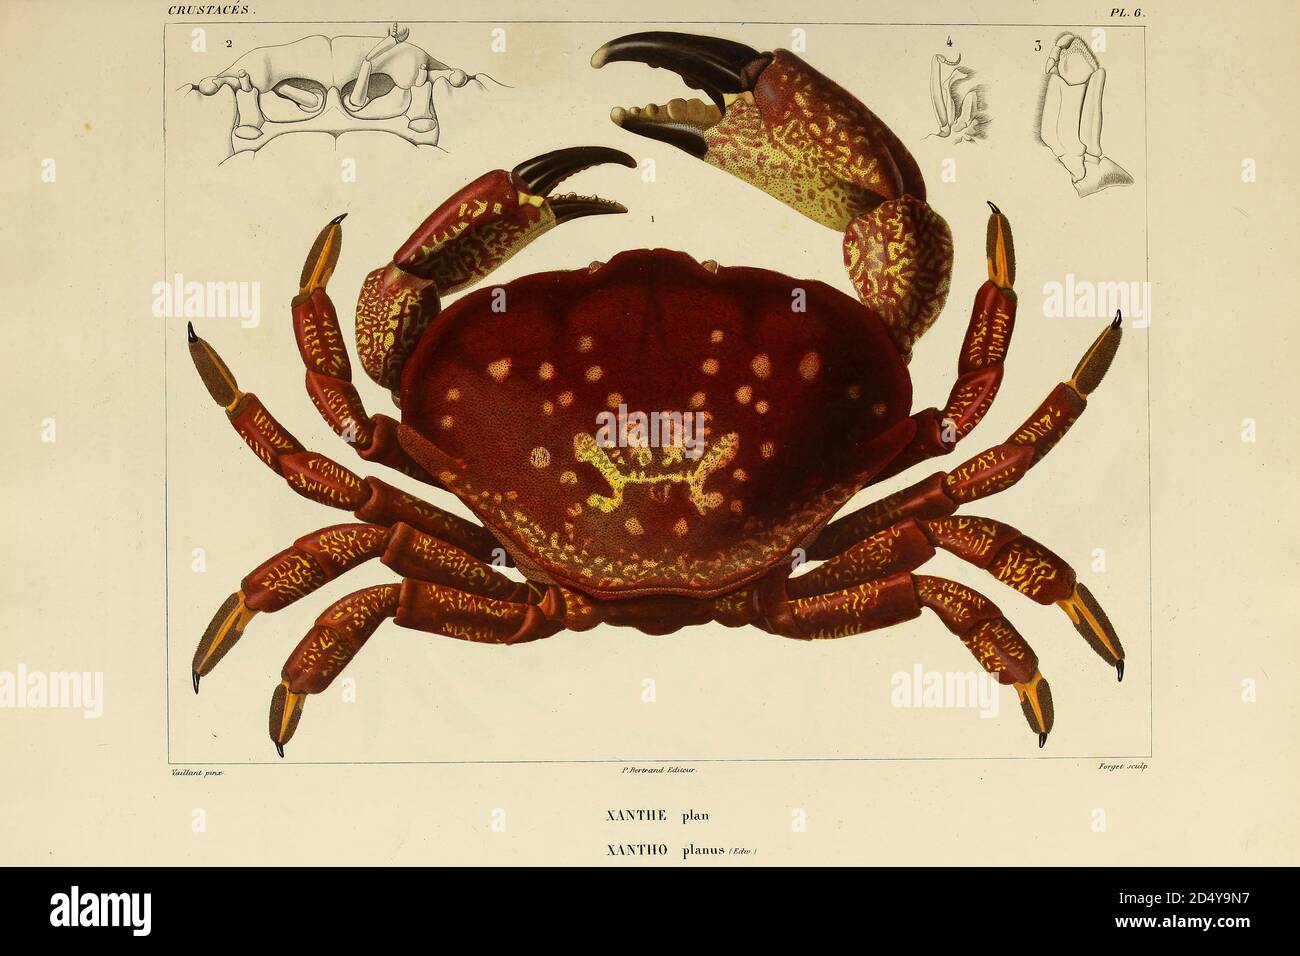 Xanthe or Xantho is a genus of crabs in the family Xanthidae, Crustaceans (Crustacea) form a large, diverse arthropod taxon which includes such animals as crabs, lobsters, crayfish, shrimps, prawns, krill, woodlice, and barnacles hand coloured sketch From the book 'Voyage dans l'Amérique Méridionale' [Journey to South America: (Brazil, the eastern republic of Uruguay, the Argentine Republic, Patagonia, the republic of Chile, the republic of Bolivia, the republic of Peru), executed during the years 1826 - 1833] Volume 6 Part 1 (Crustacean). By: Orbigny, Alcide Dessalines d', d'Orbigny, 1802-185 Stock Photo